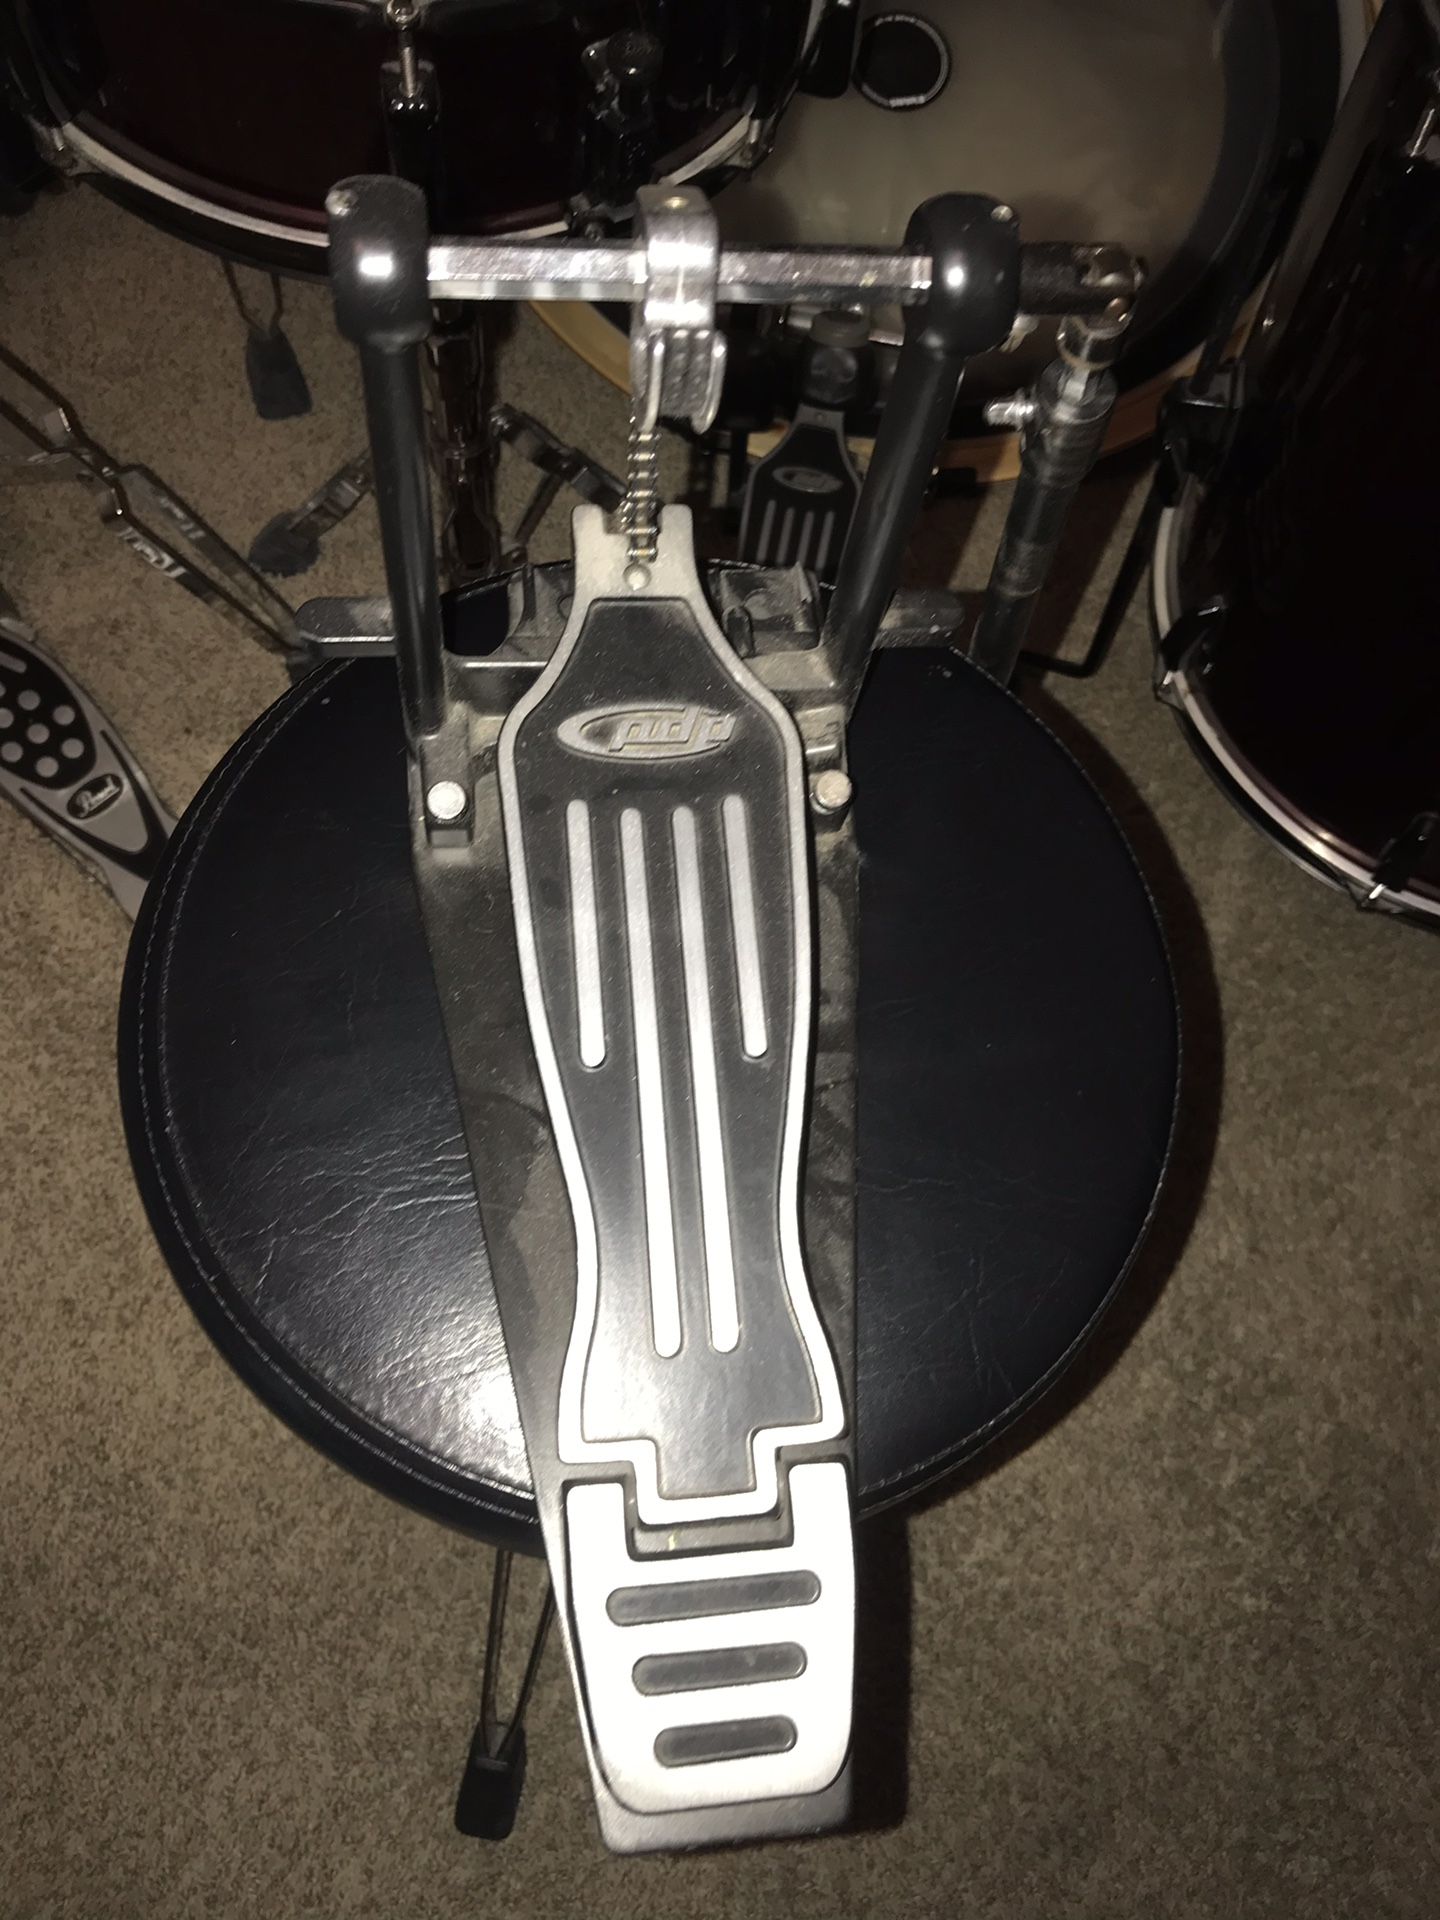 PDP double pedal